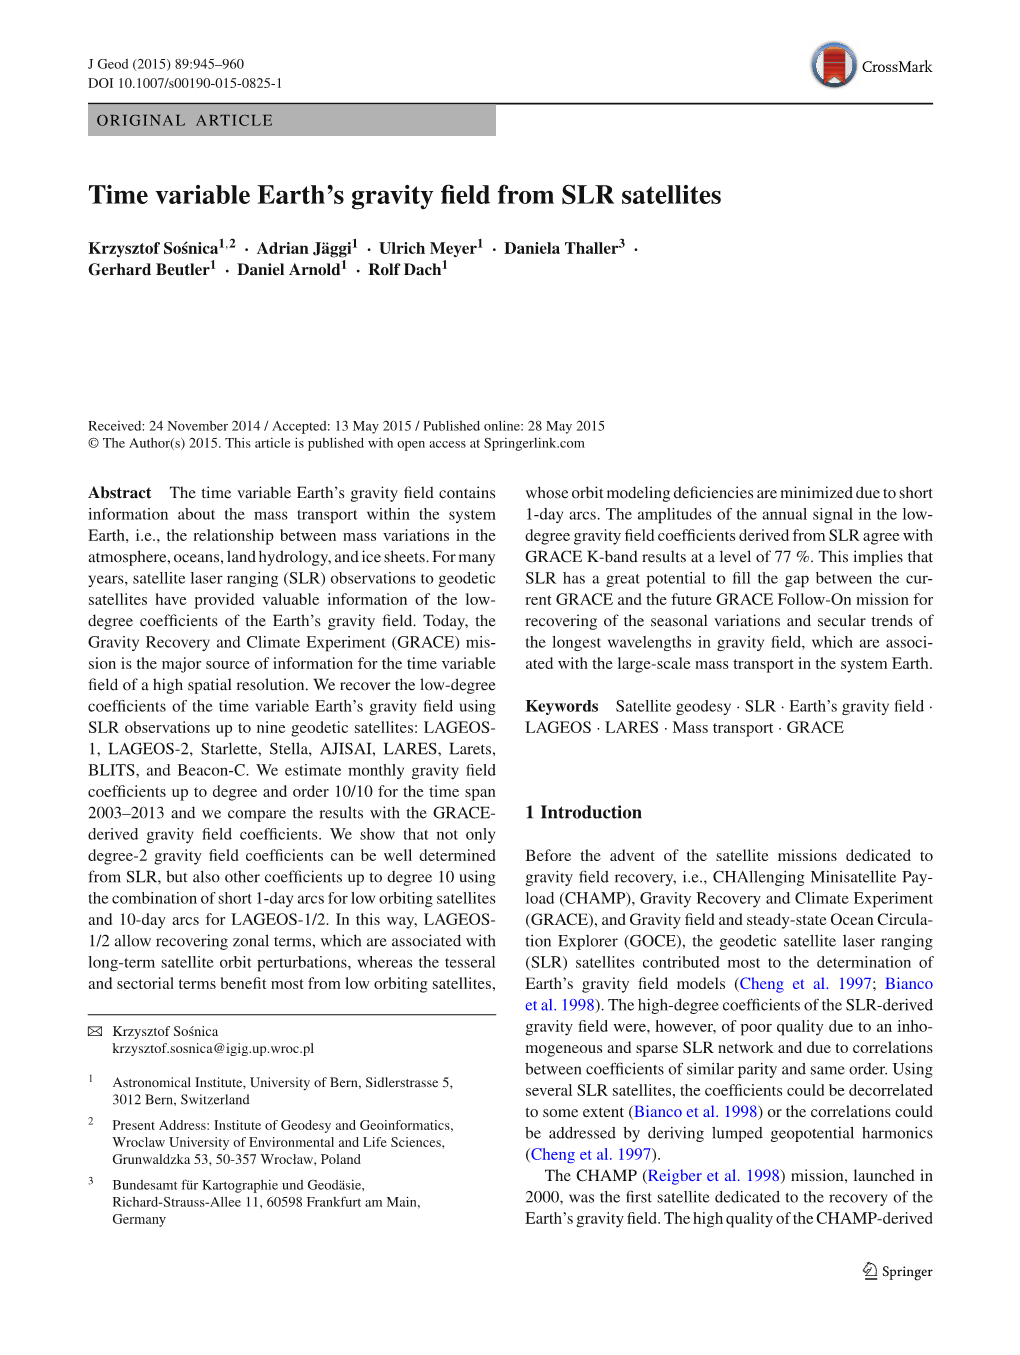 Time Variable Earth's Gravity Field from SLR Satellites